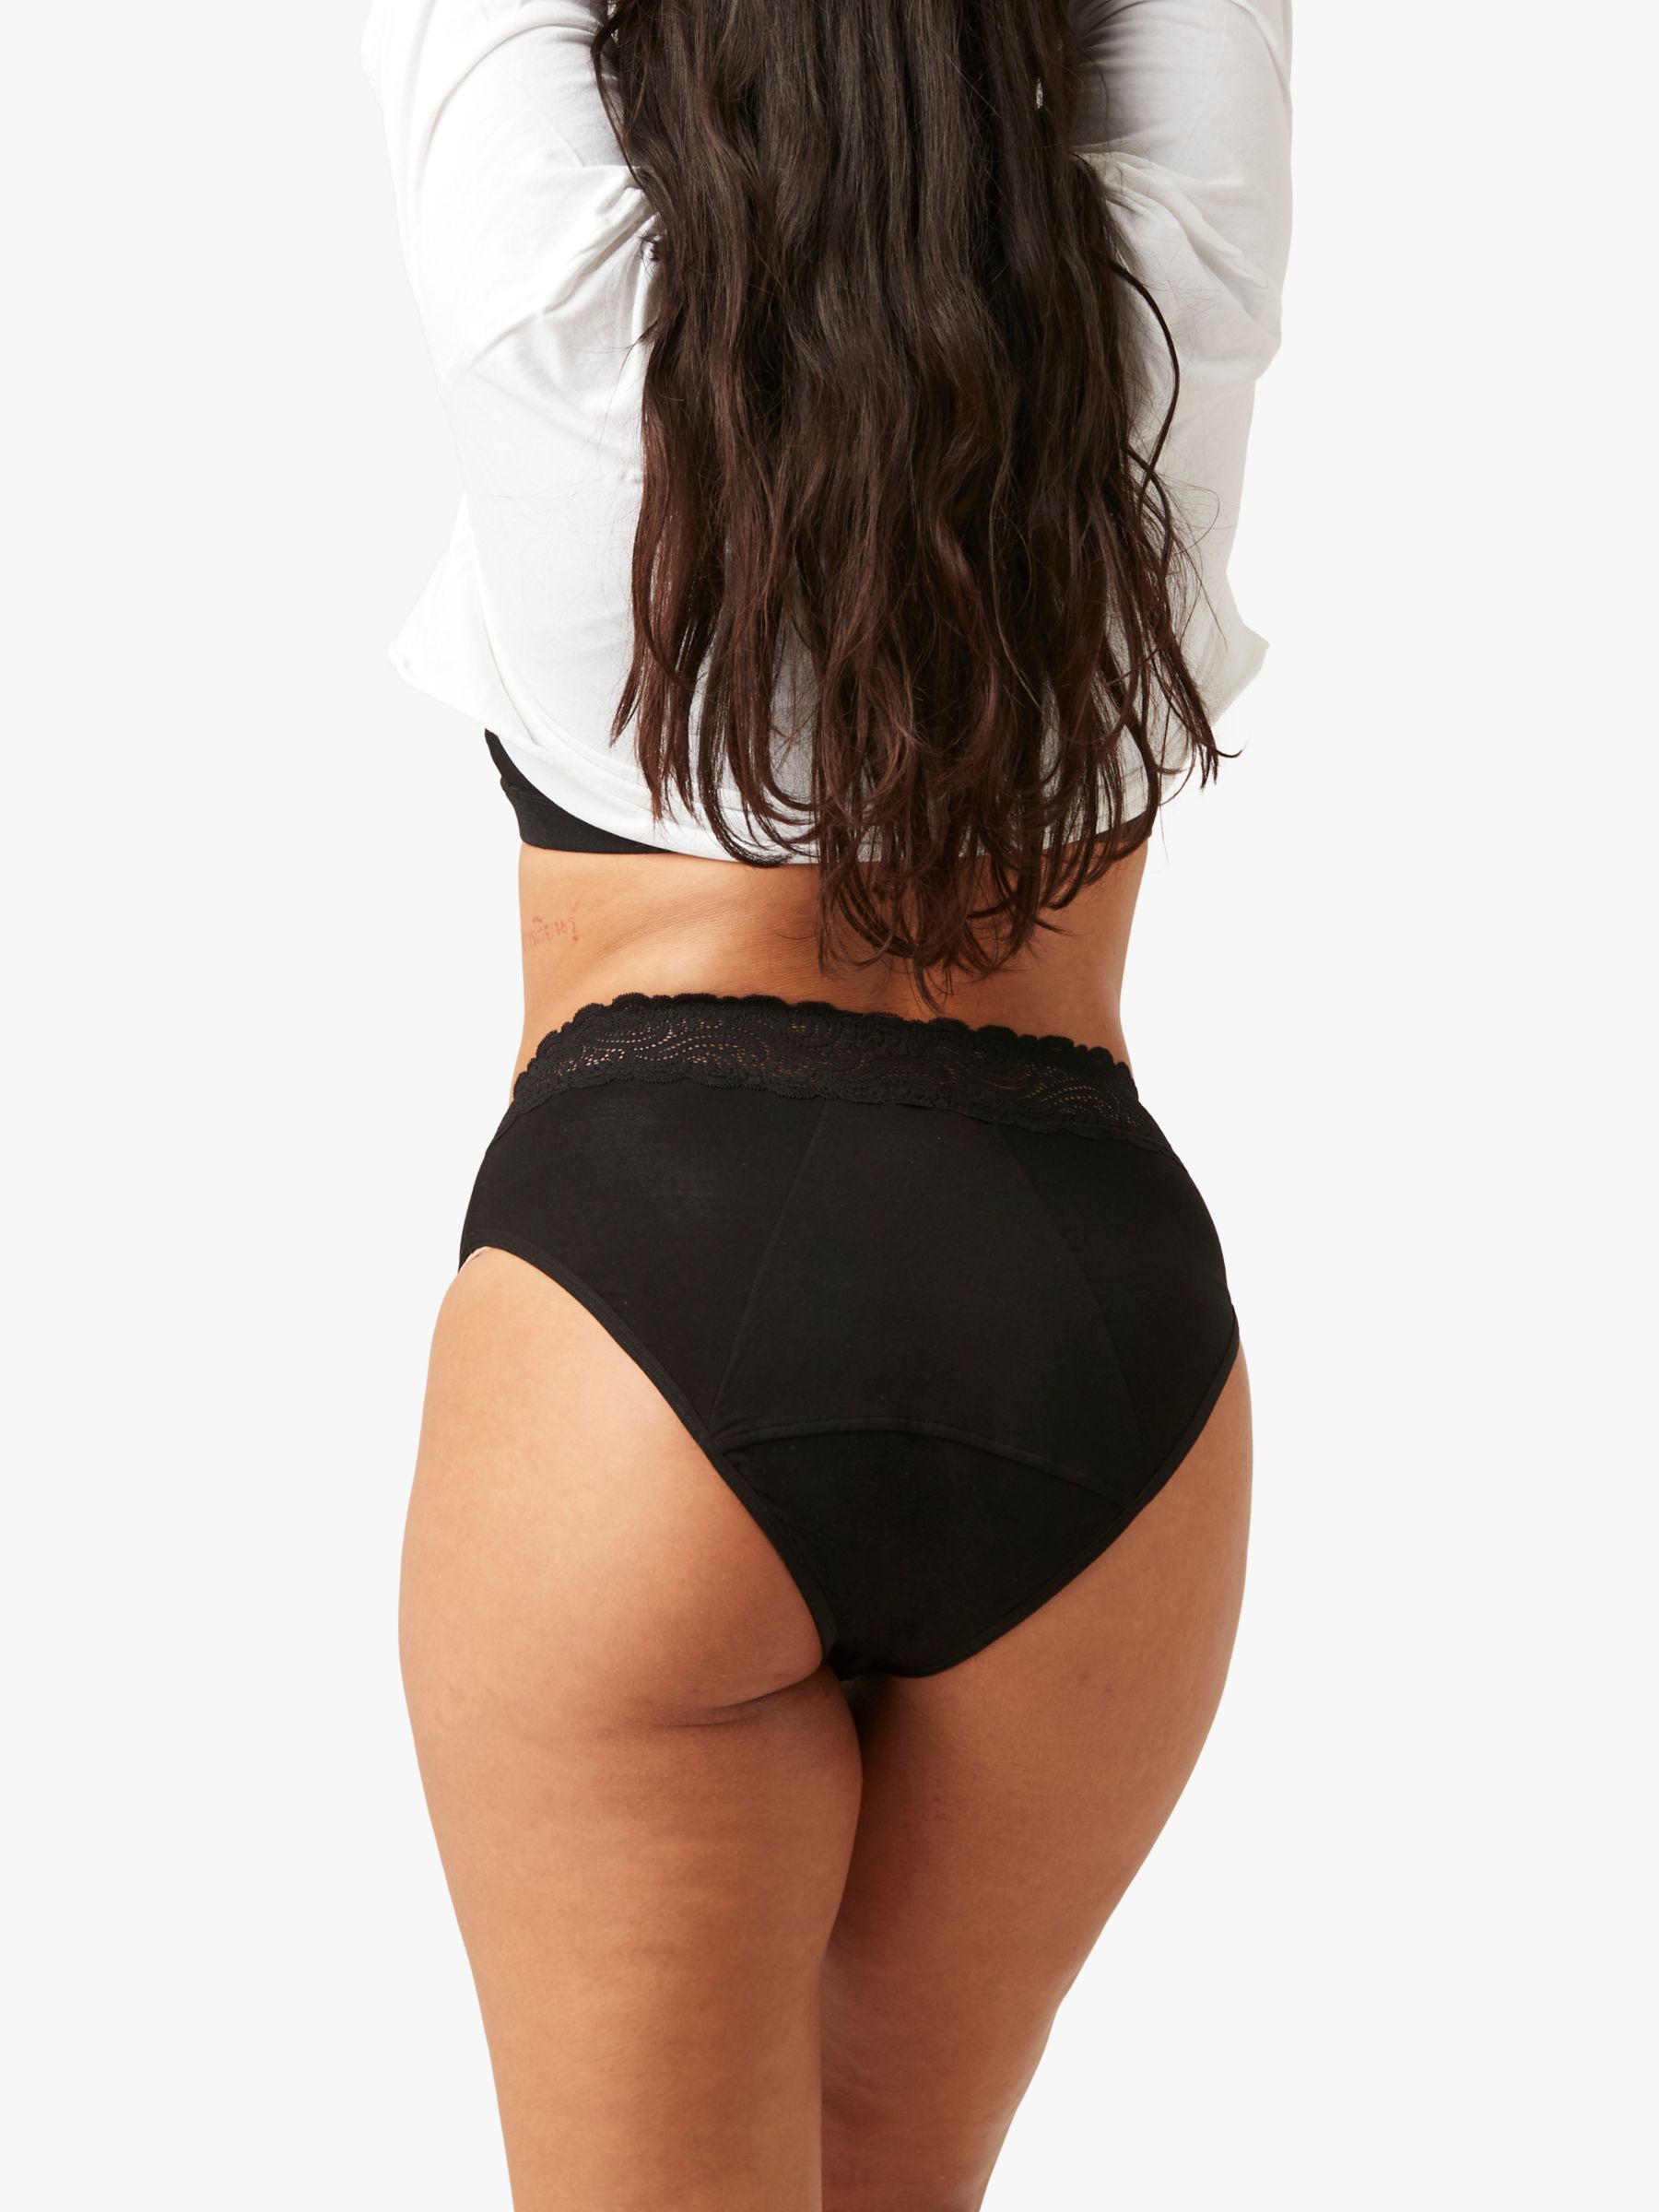 Modibodi Sensual Hi-Waist Period Knickers Reduced by 30% For Prime Day